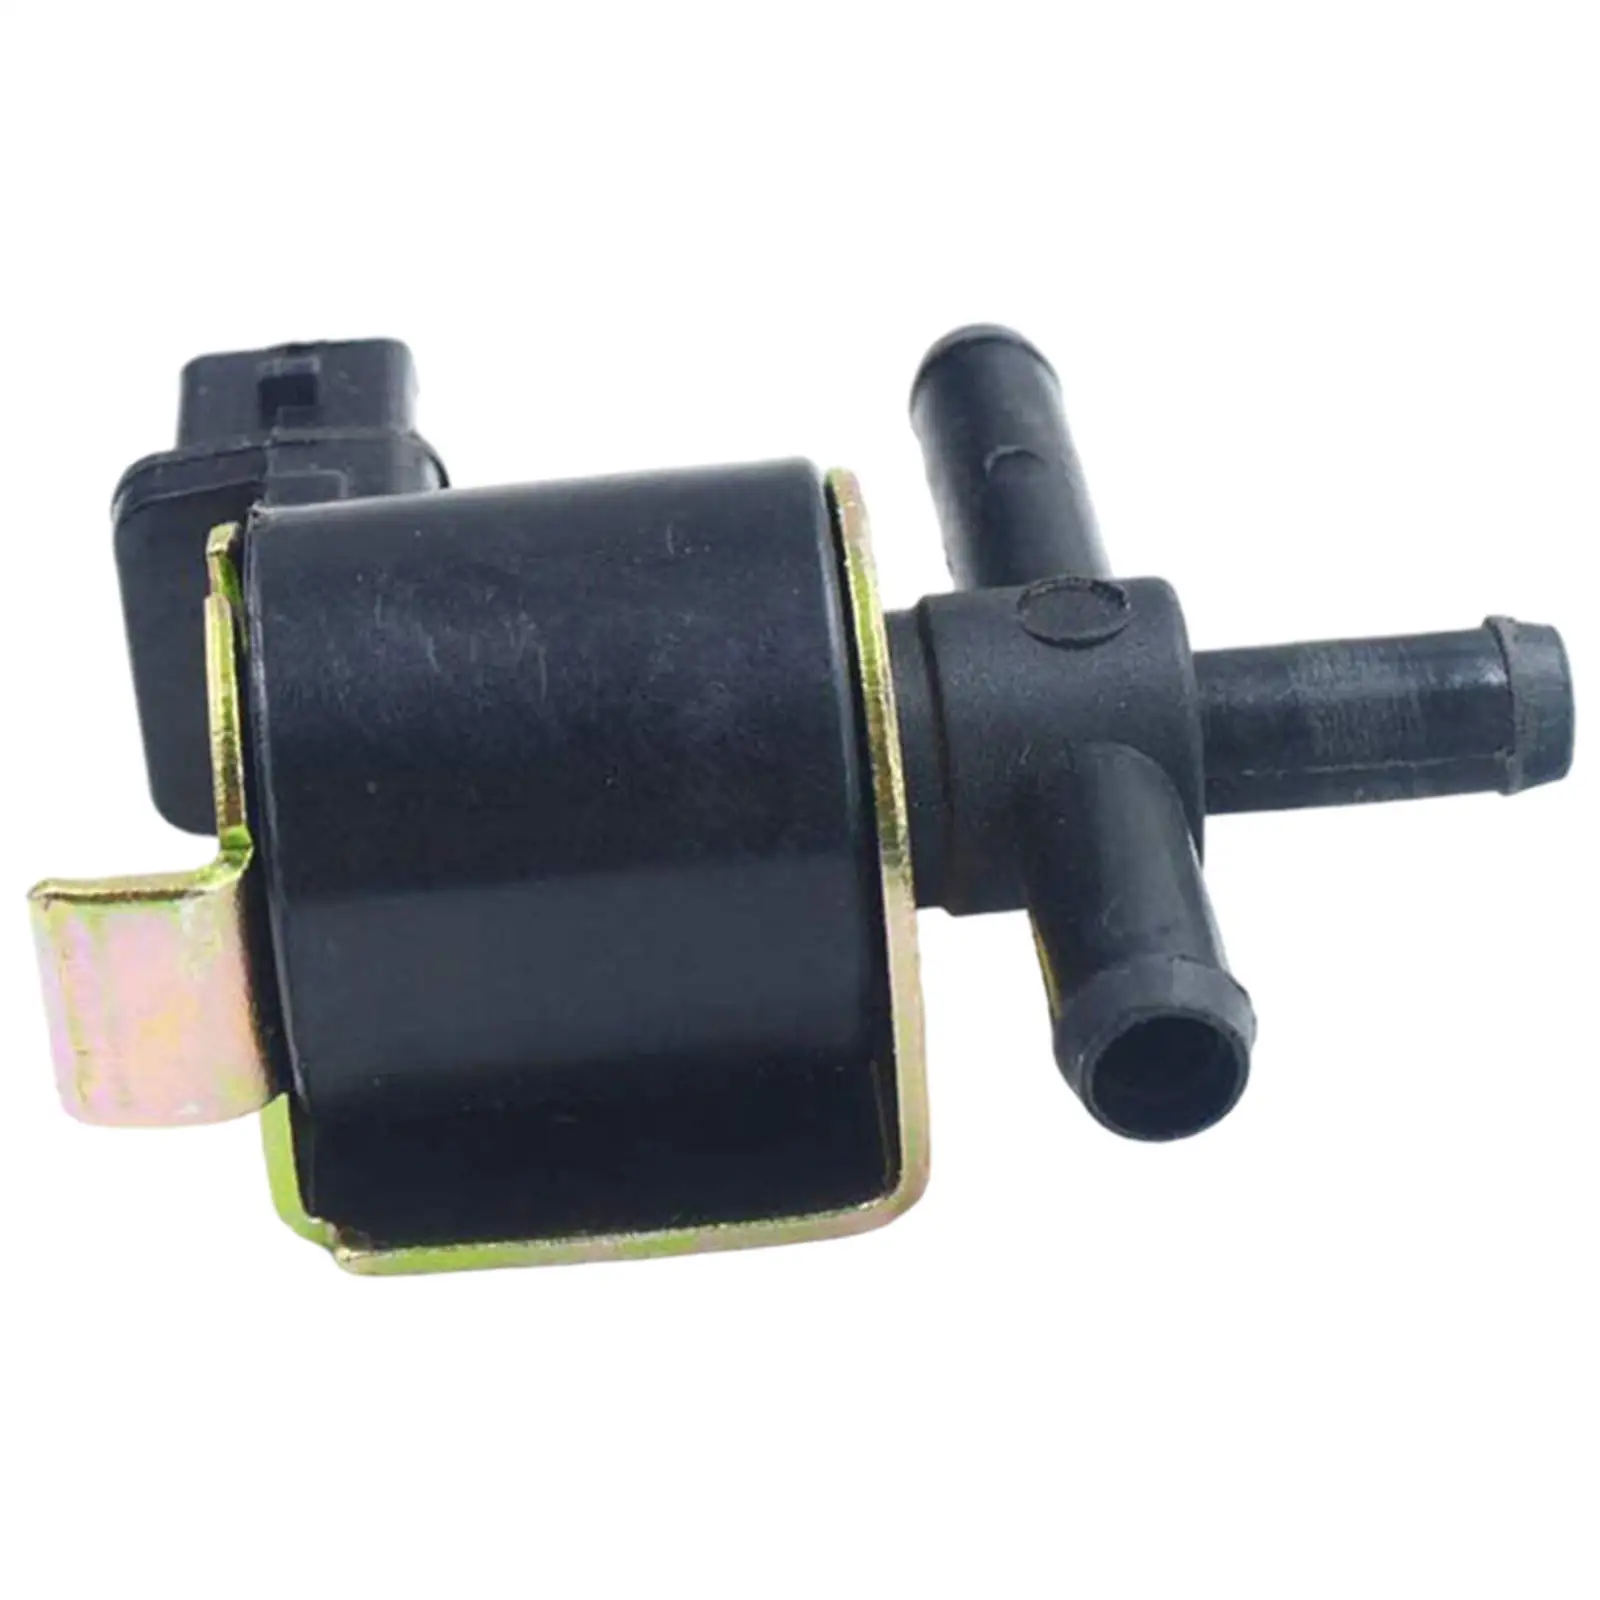 Solenoid Control Valve Auto Parts Black Boost Controller for Audi S4 A4 A6 01-2005 078906283B for Allroad 2.7T Replacement